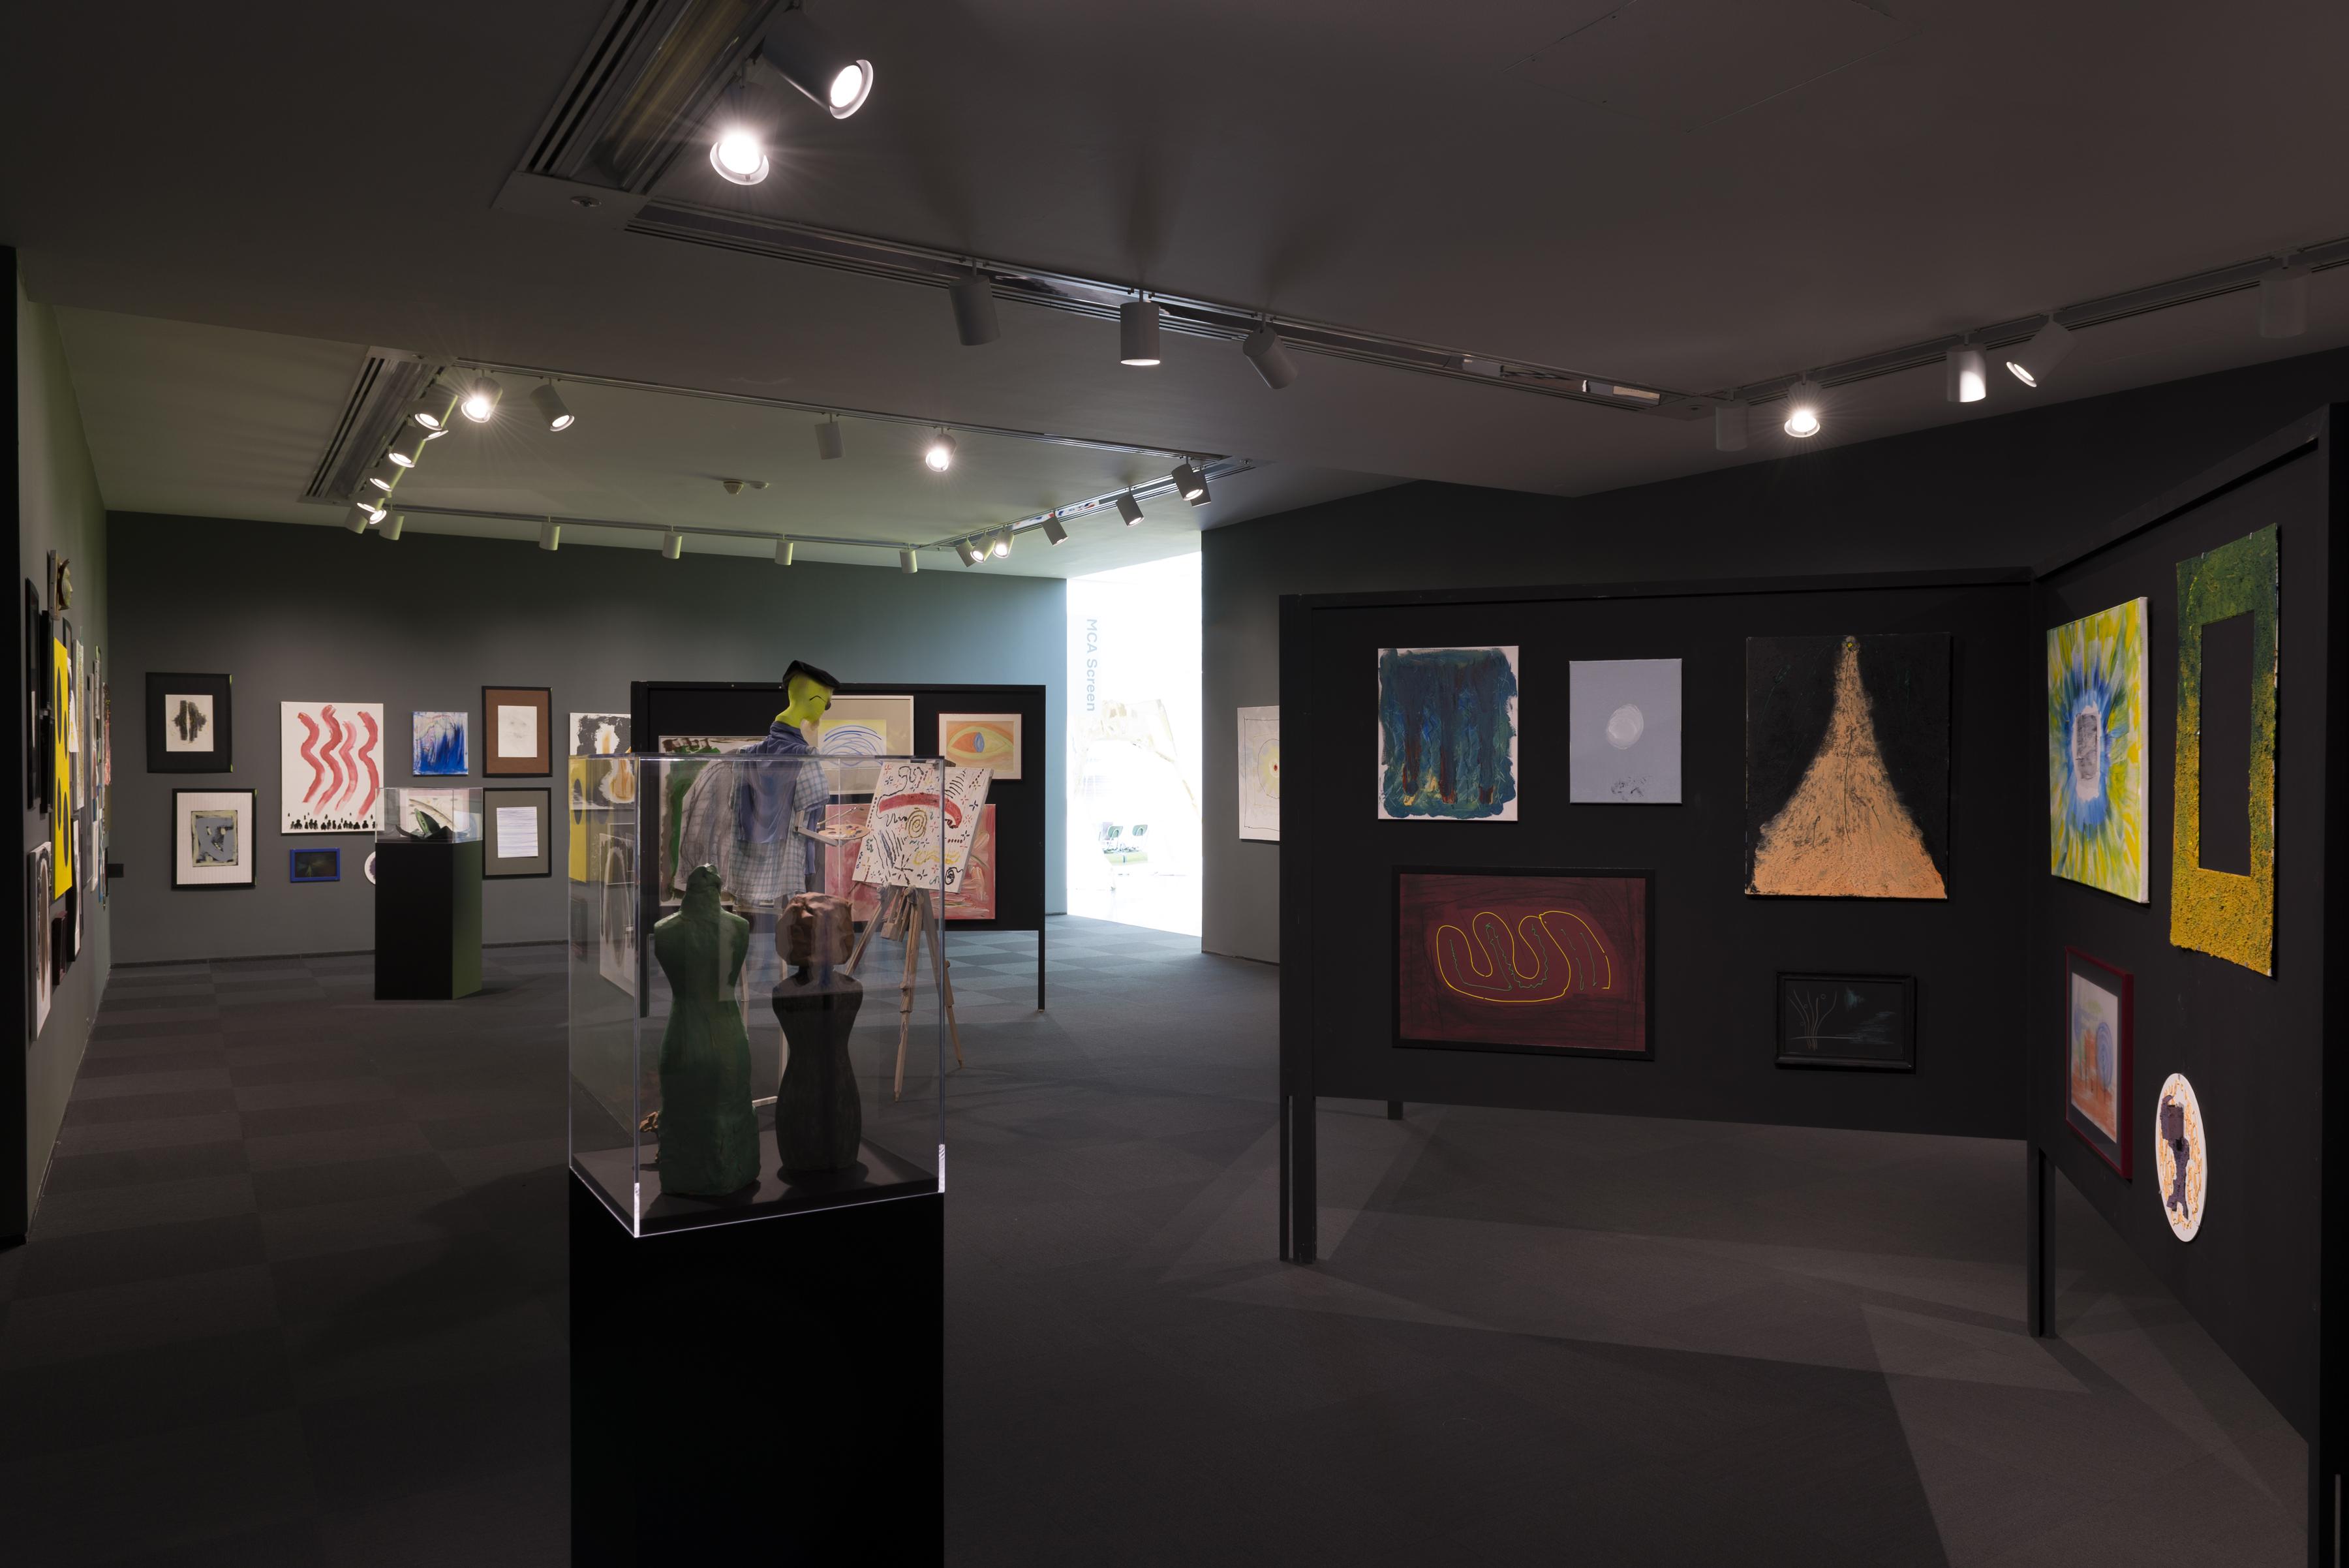 Installation view of sculptures on pedestals, colorful abstract paintings hung in clusters on a folding display board and on the walls, and a humanoid figure painting at an easel in the middle of the room